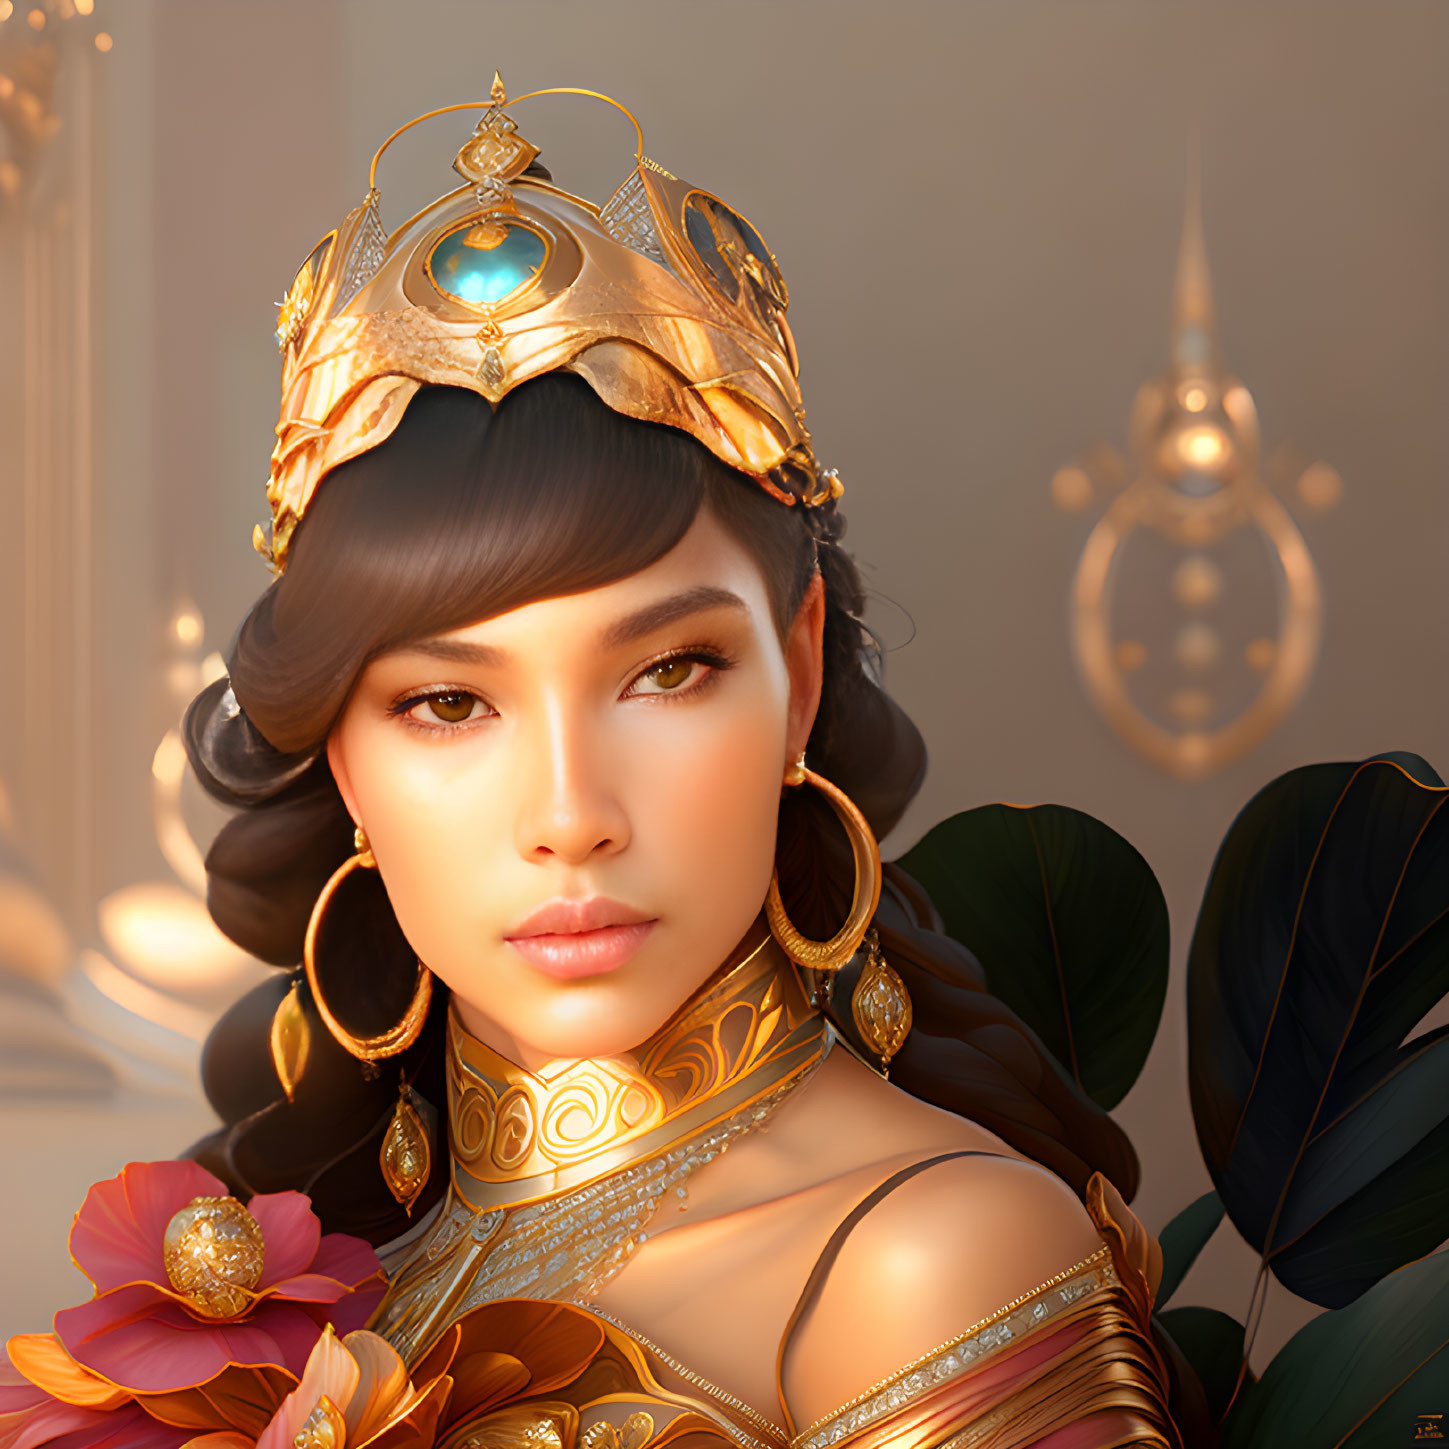 Regal woman in golden crown and jewelry on warm, soft-focused background